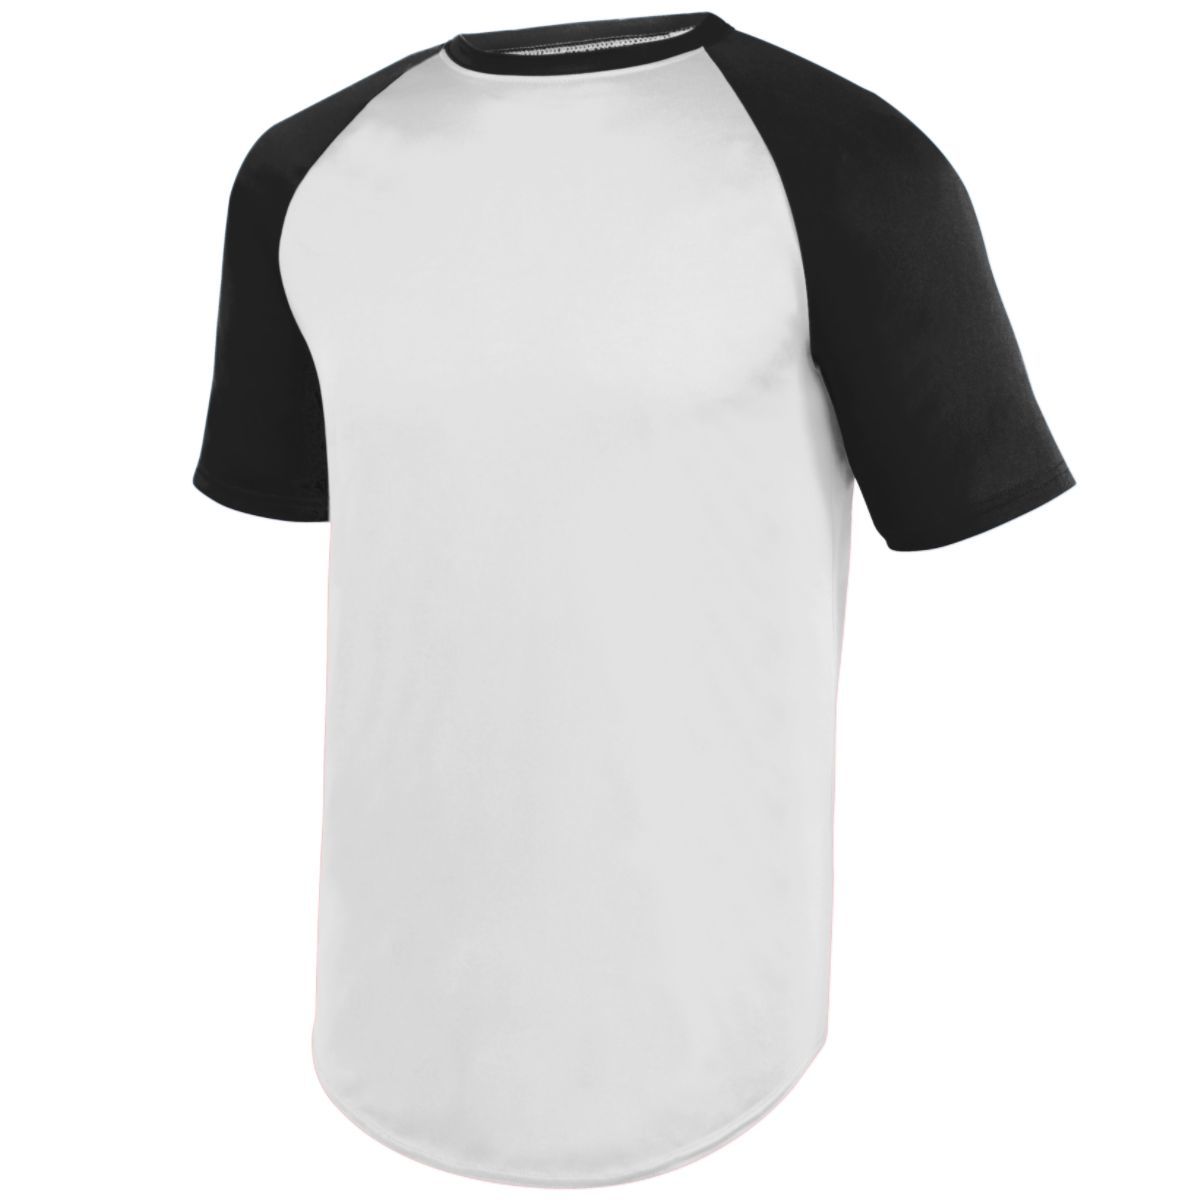 Augusta Sportswear Youth Wicking Short Sleeve Baseball Jersey in White/Black  -Part of the Youth, Youth-Jersey, Augusta-Products, Baseball, Shirts, All-Sports, All-Sports-1 product lines at KanaleyCreations.com